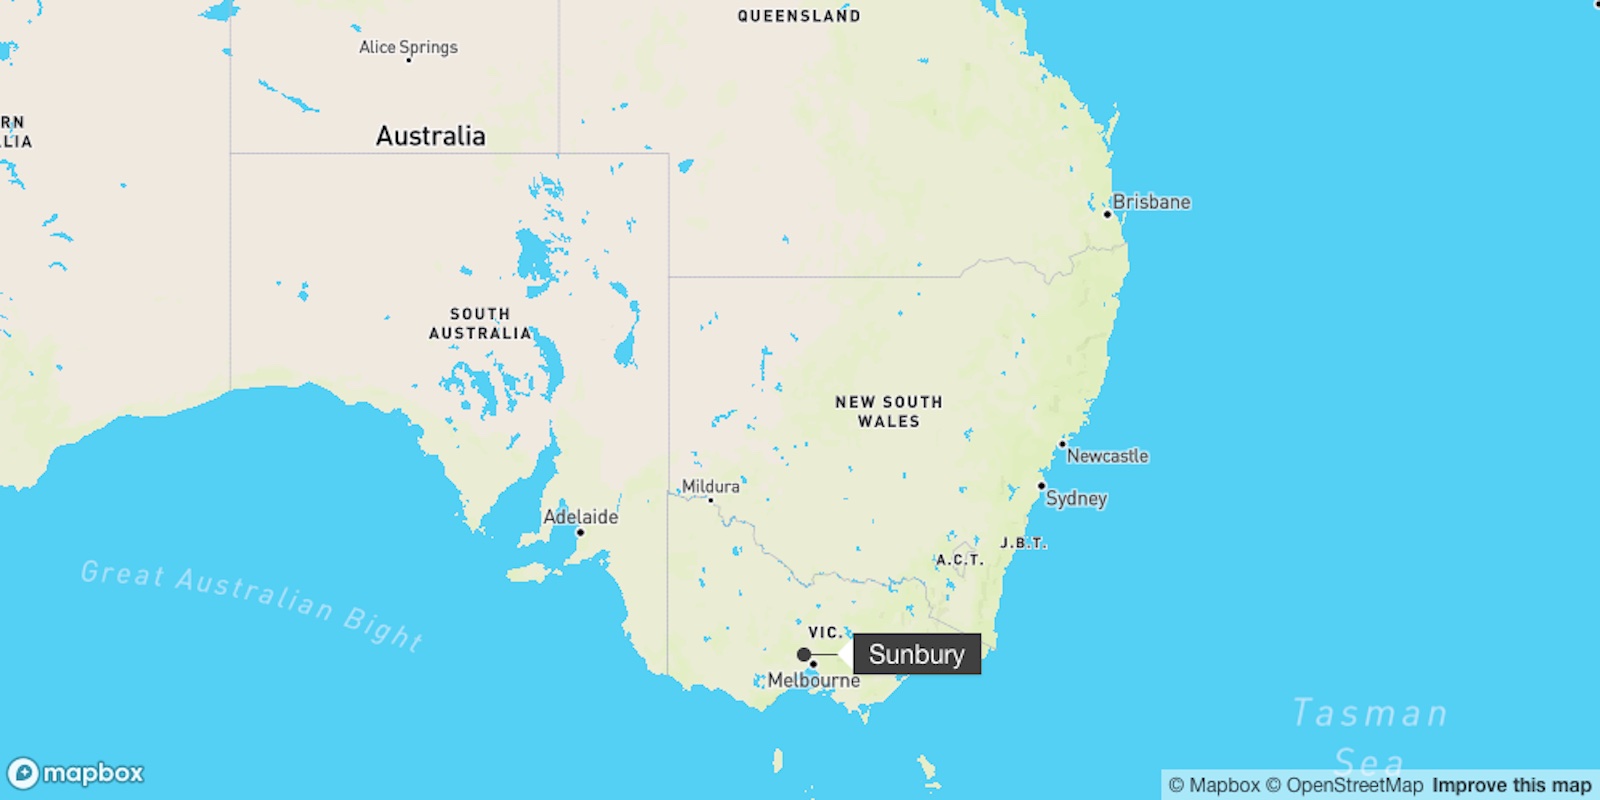 A rare earthquake hits Melbourne, Australia, but causes little damage;  It is the largest in 120 years